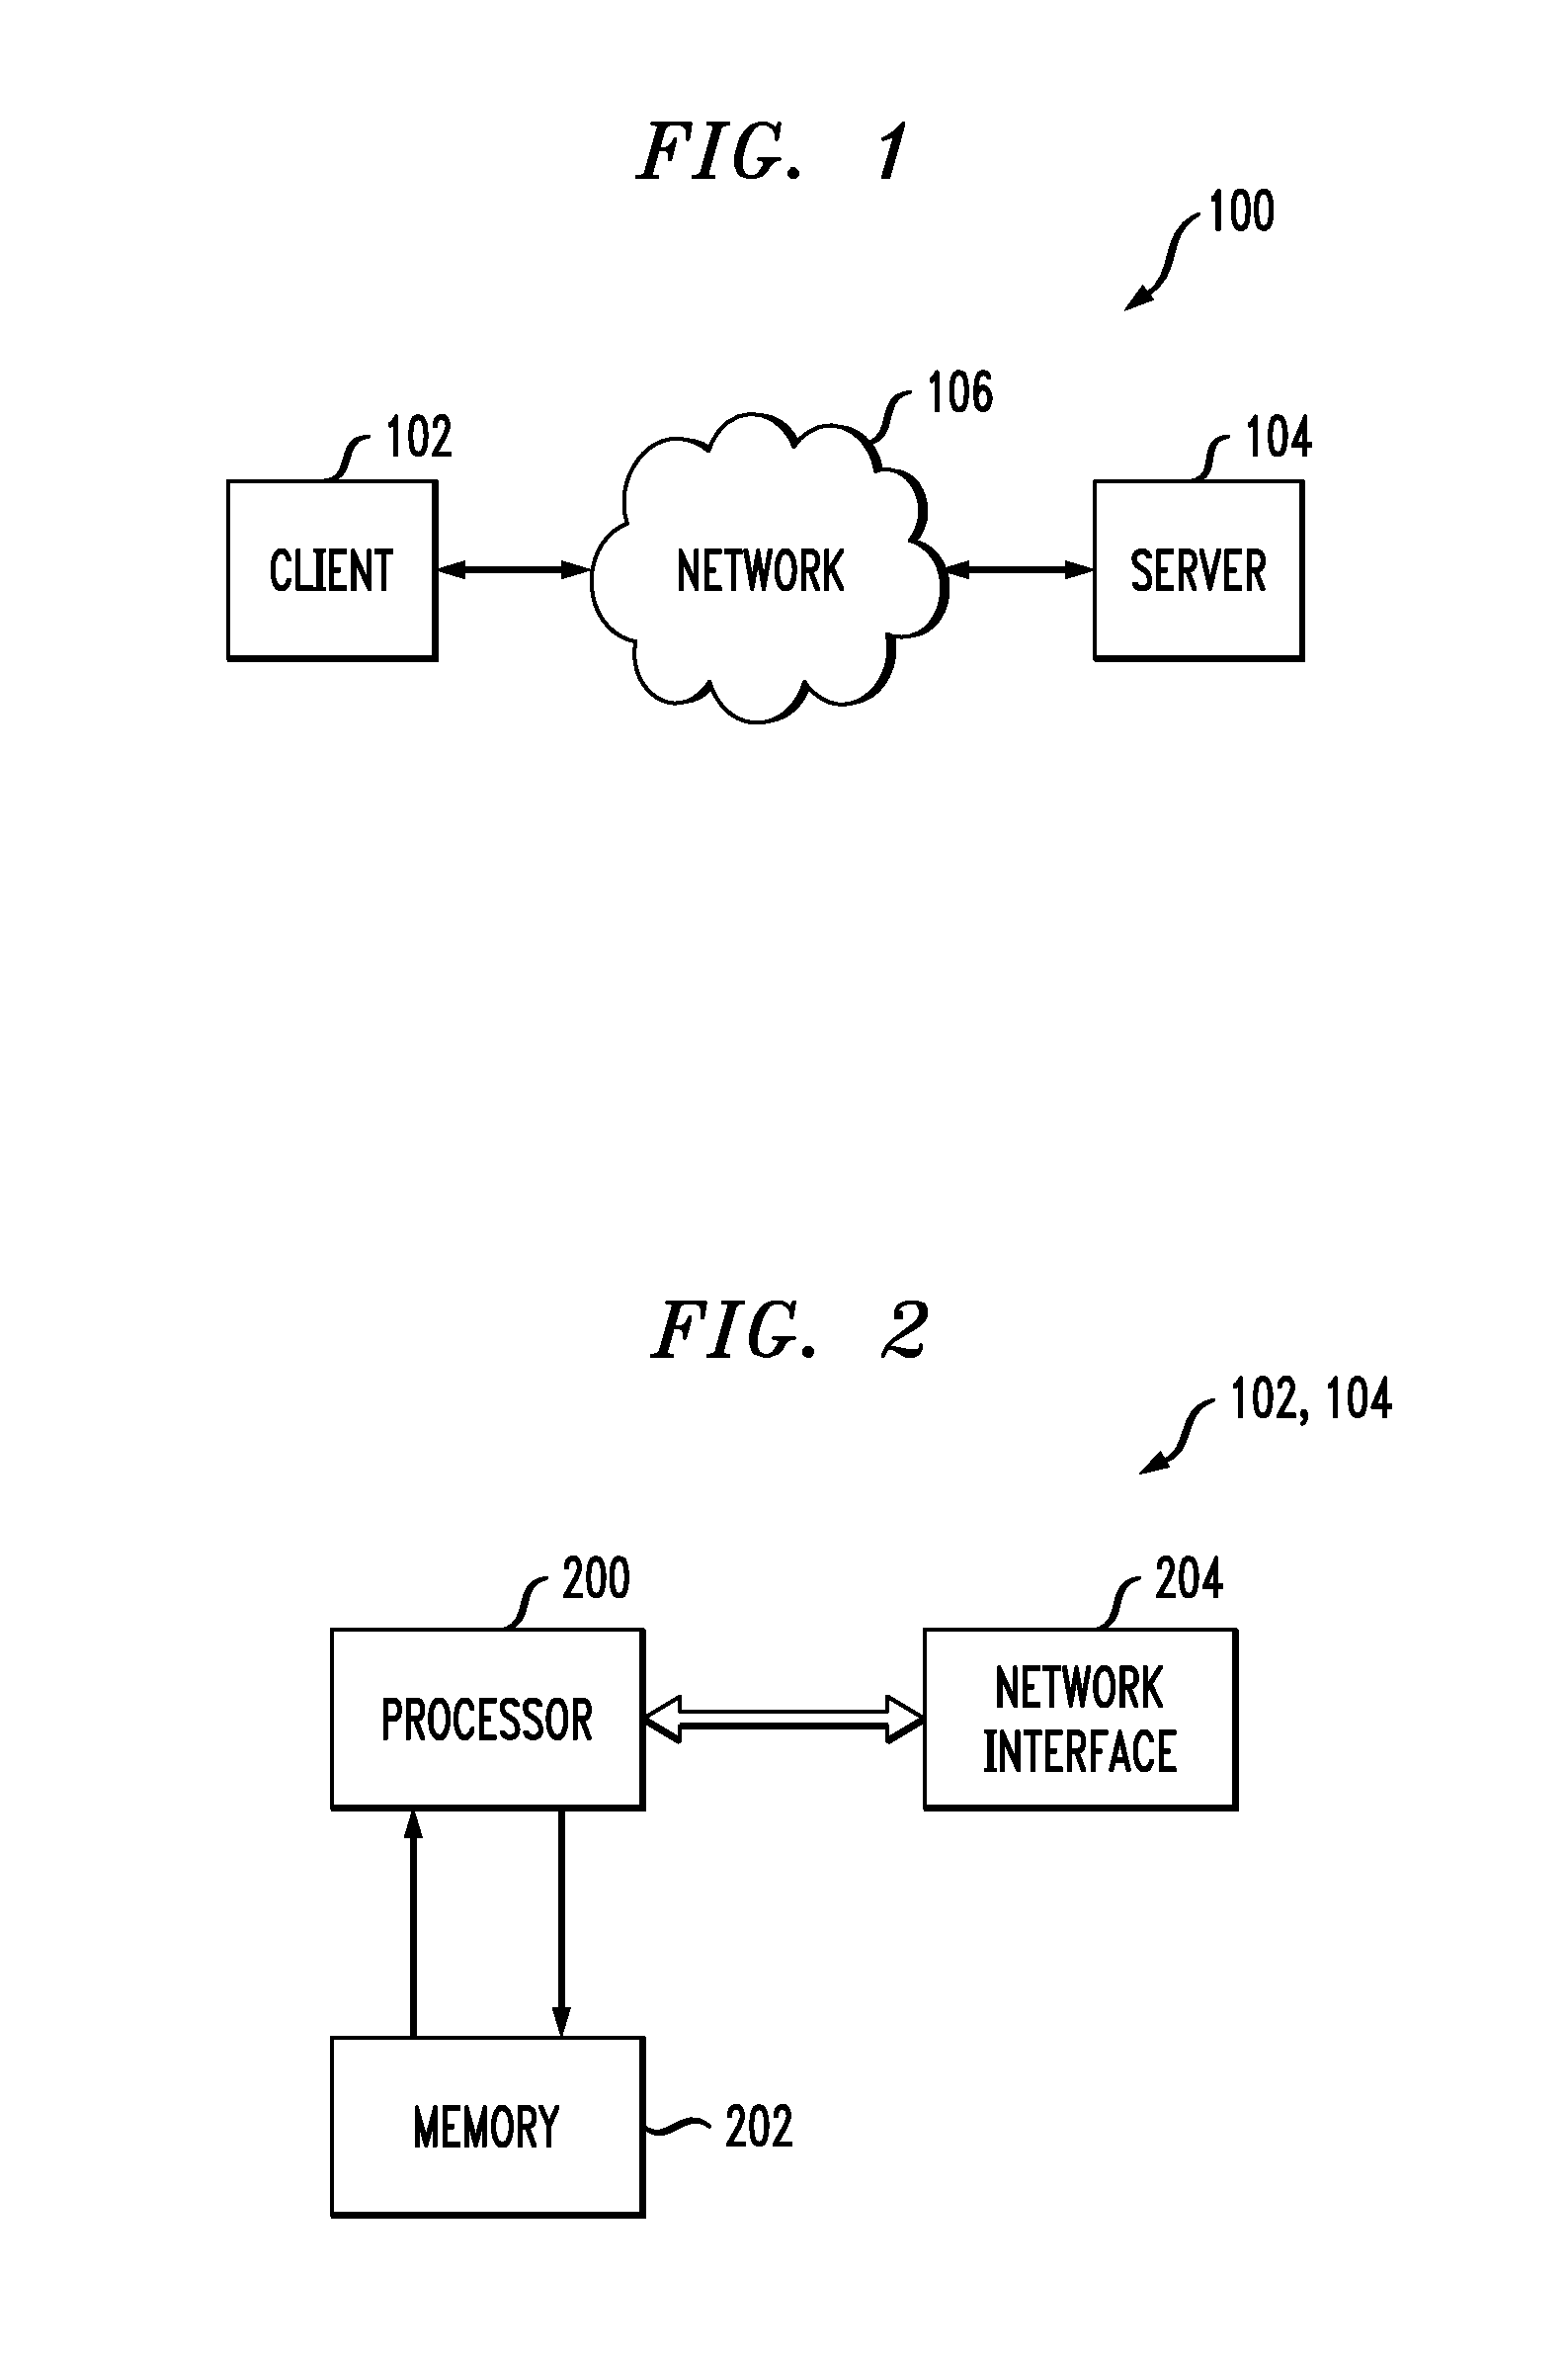 Cryptographically linking data and authentication identifiers without explicit storage of linkage